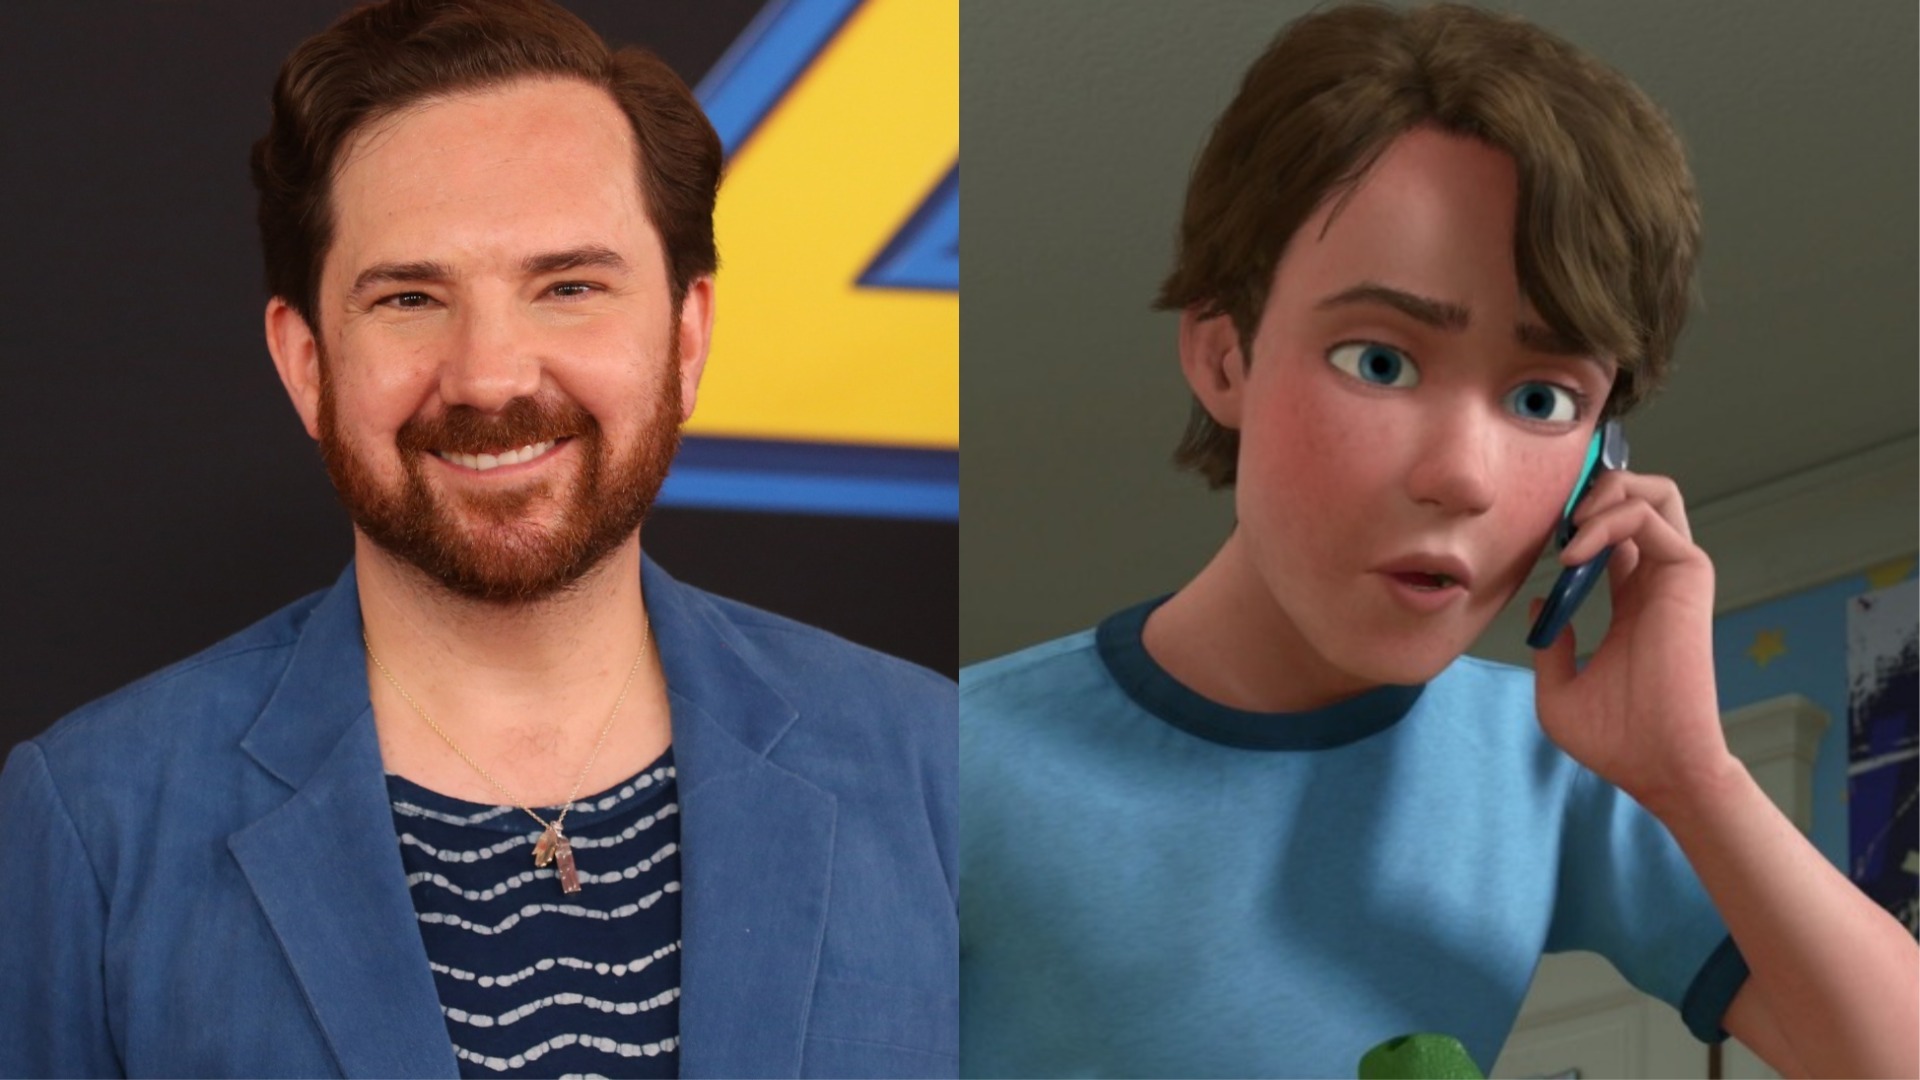 John-Morris-Voices-Andy-Davis-in-Toy-Story-4